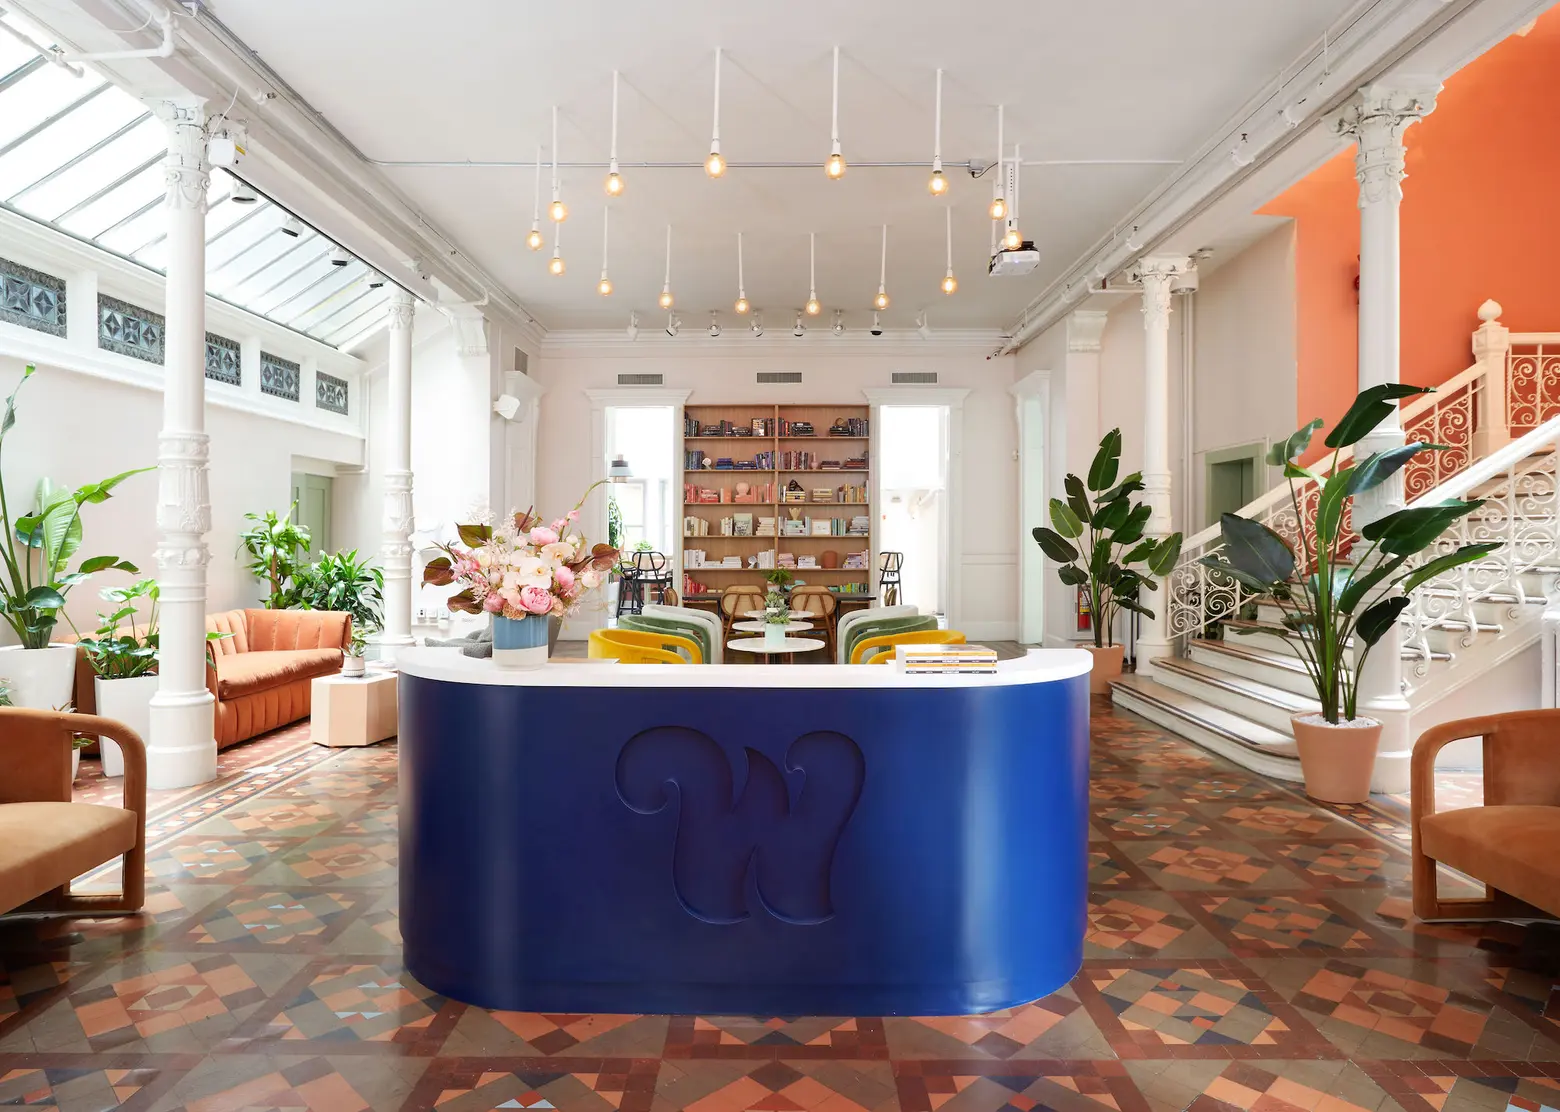 See inside the Wing’s new HQ in the East Village’s historic Stuyvesant Polyclinic building